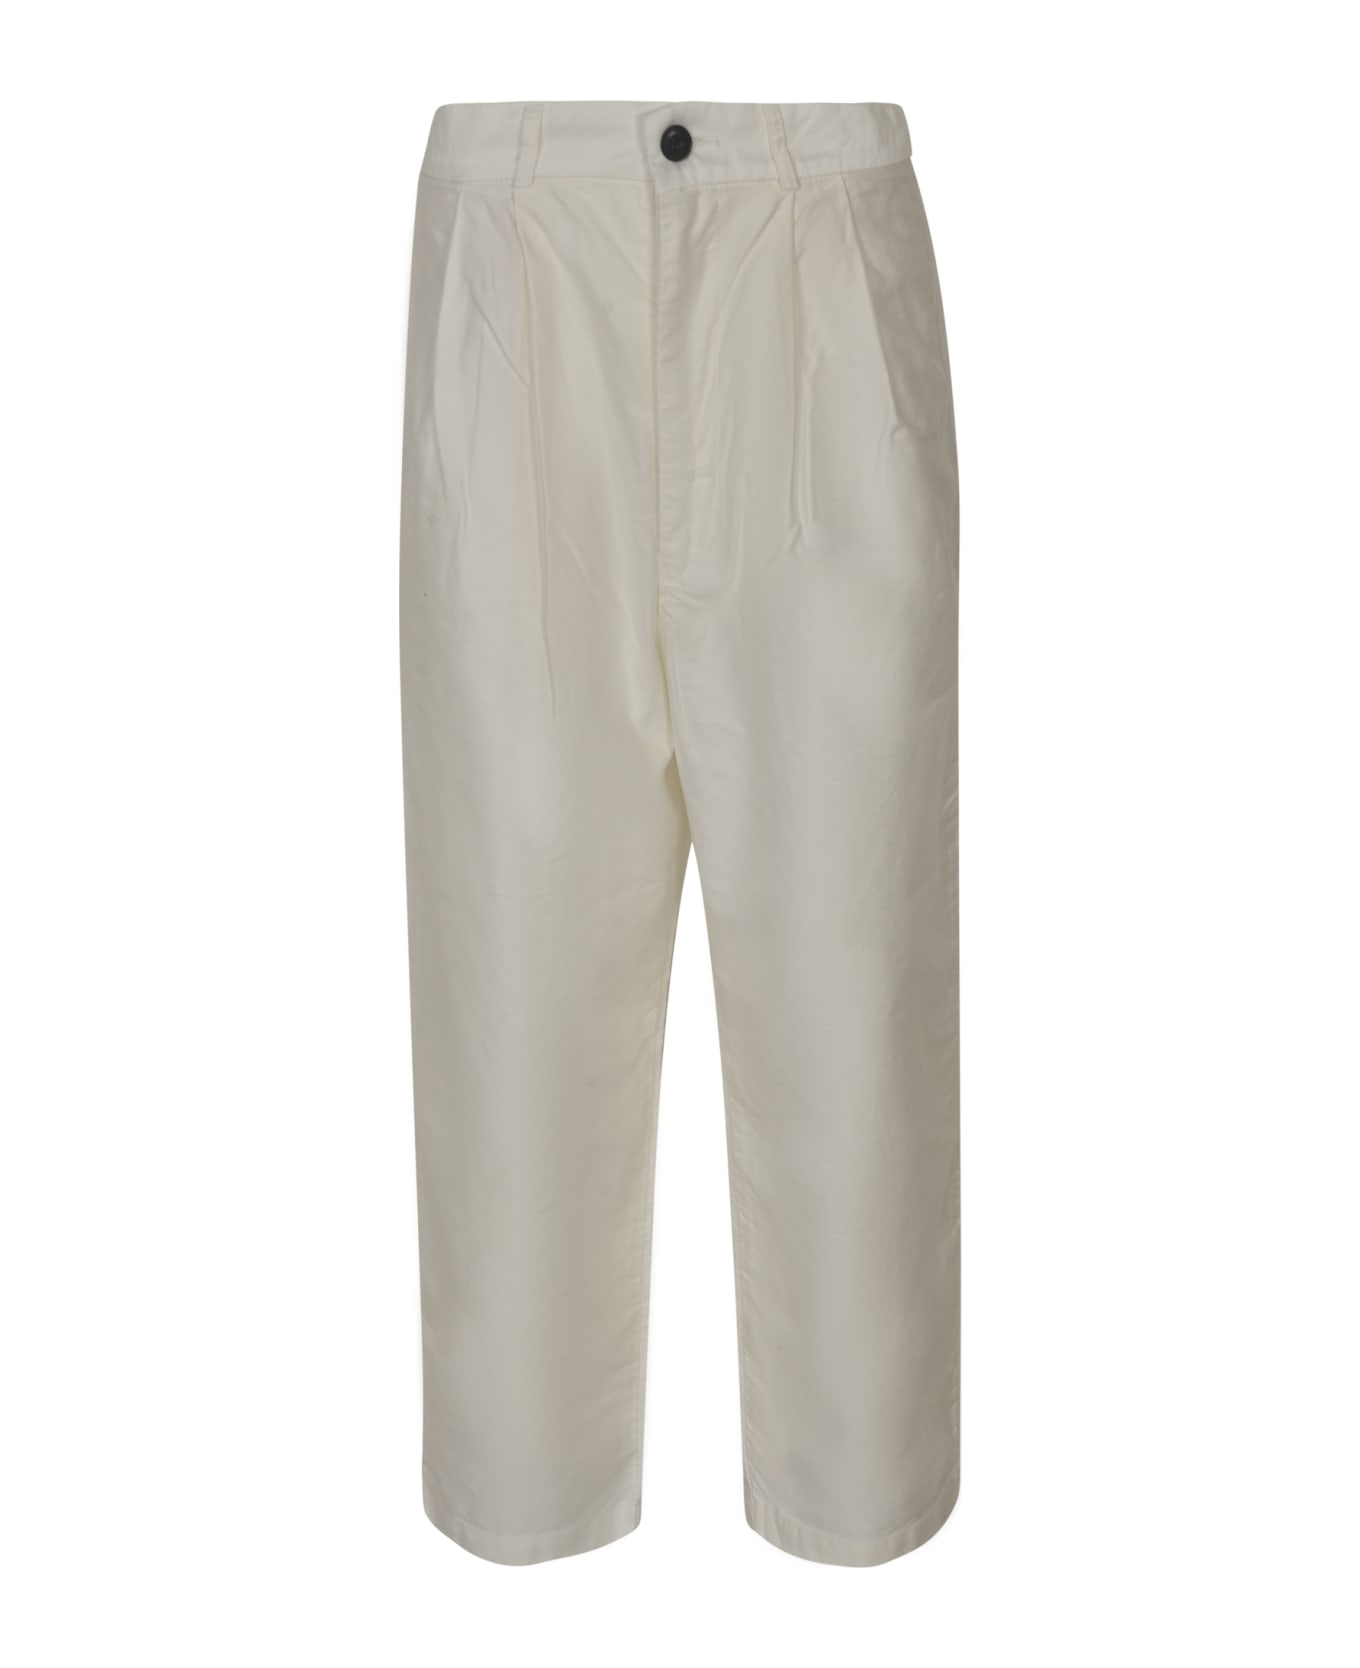 Mythinks Straight Buttoned Trousers - Ivory ボトムス